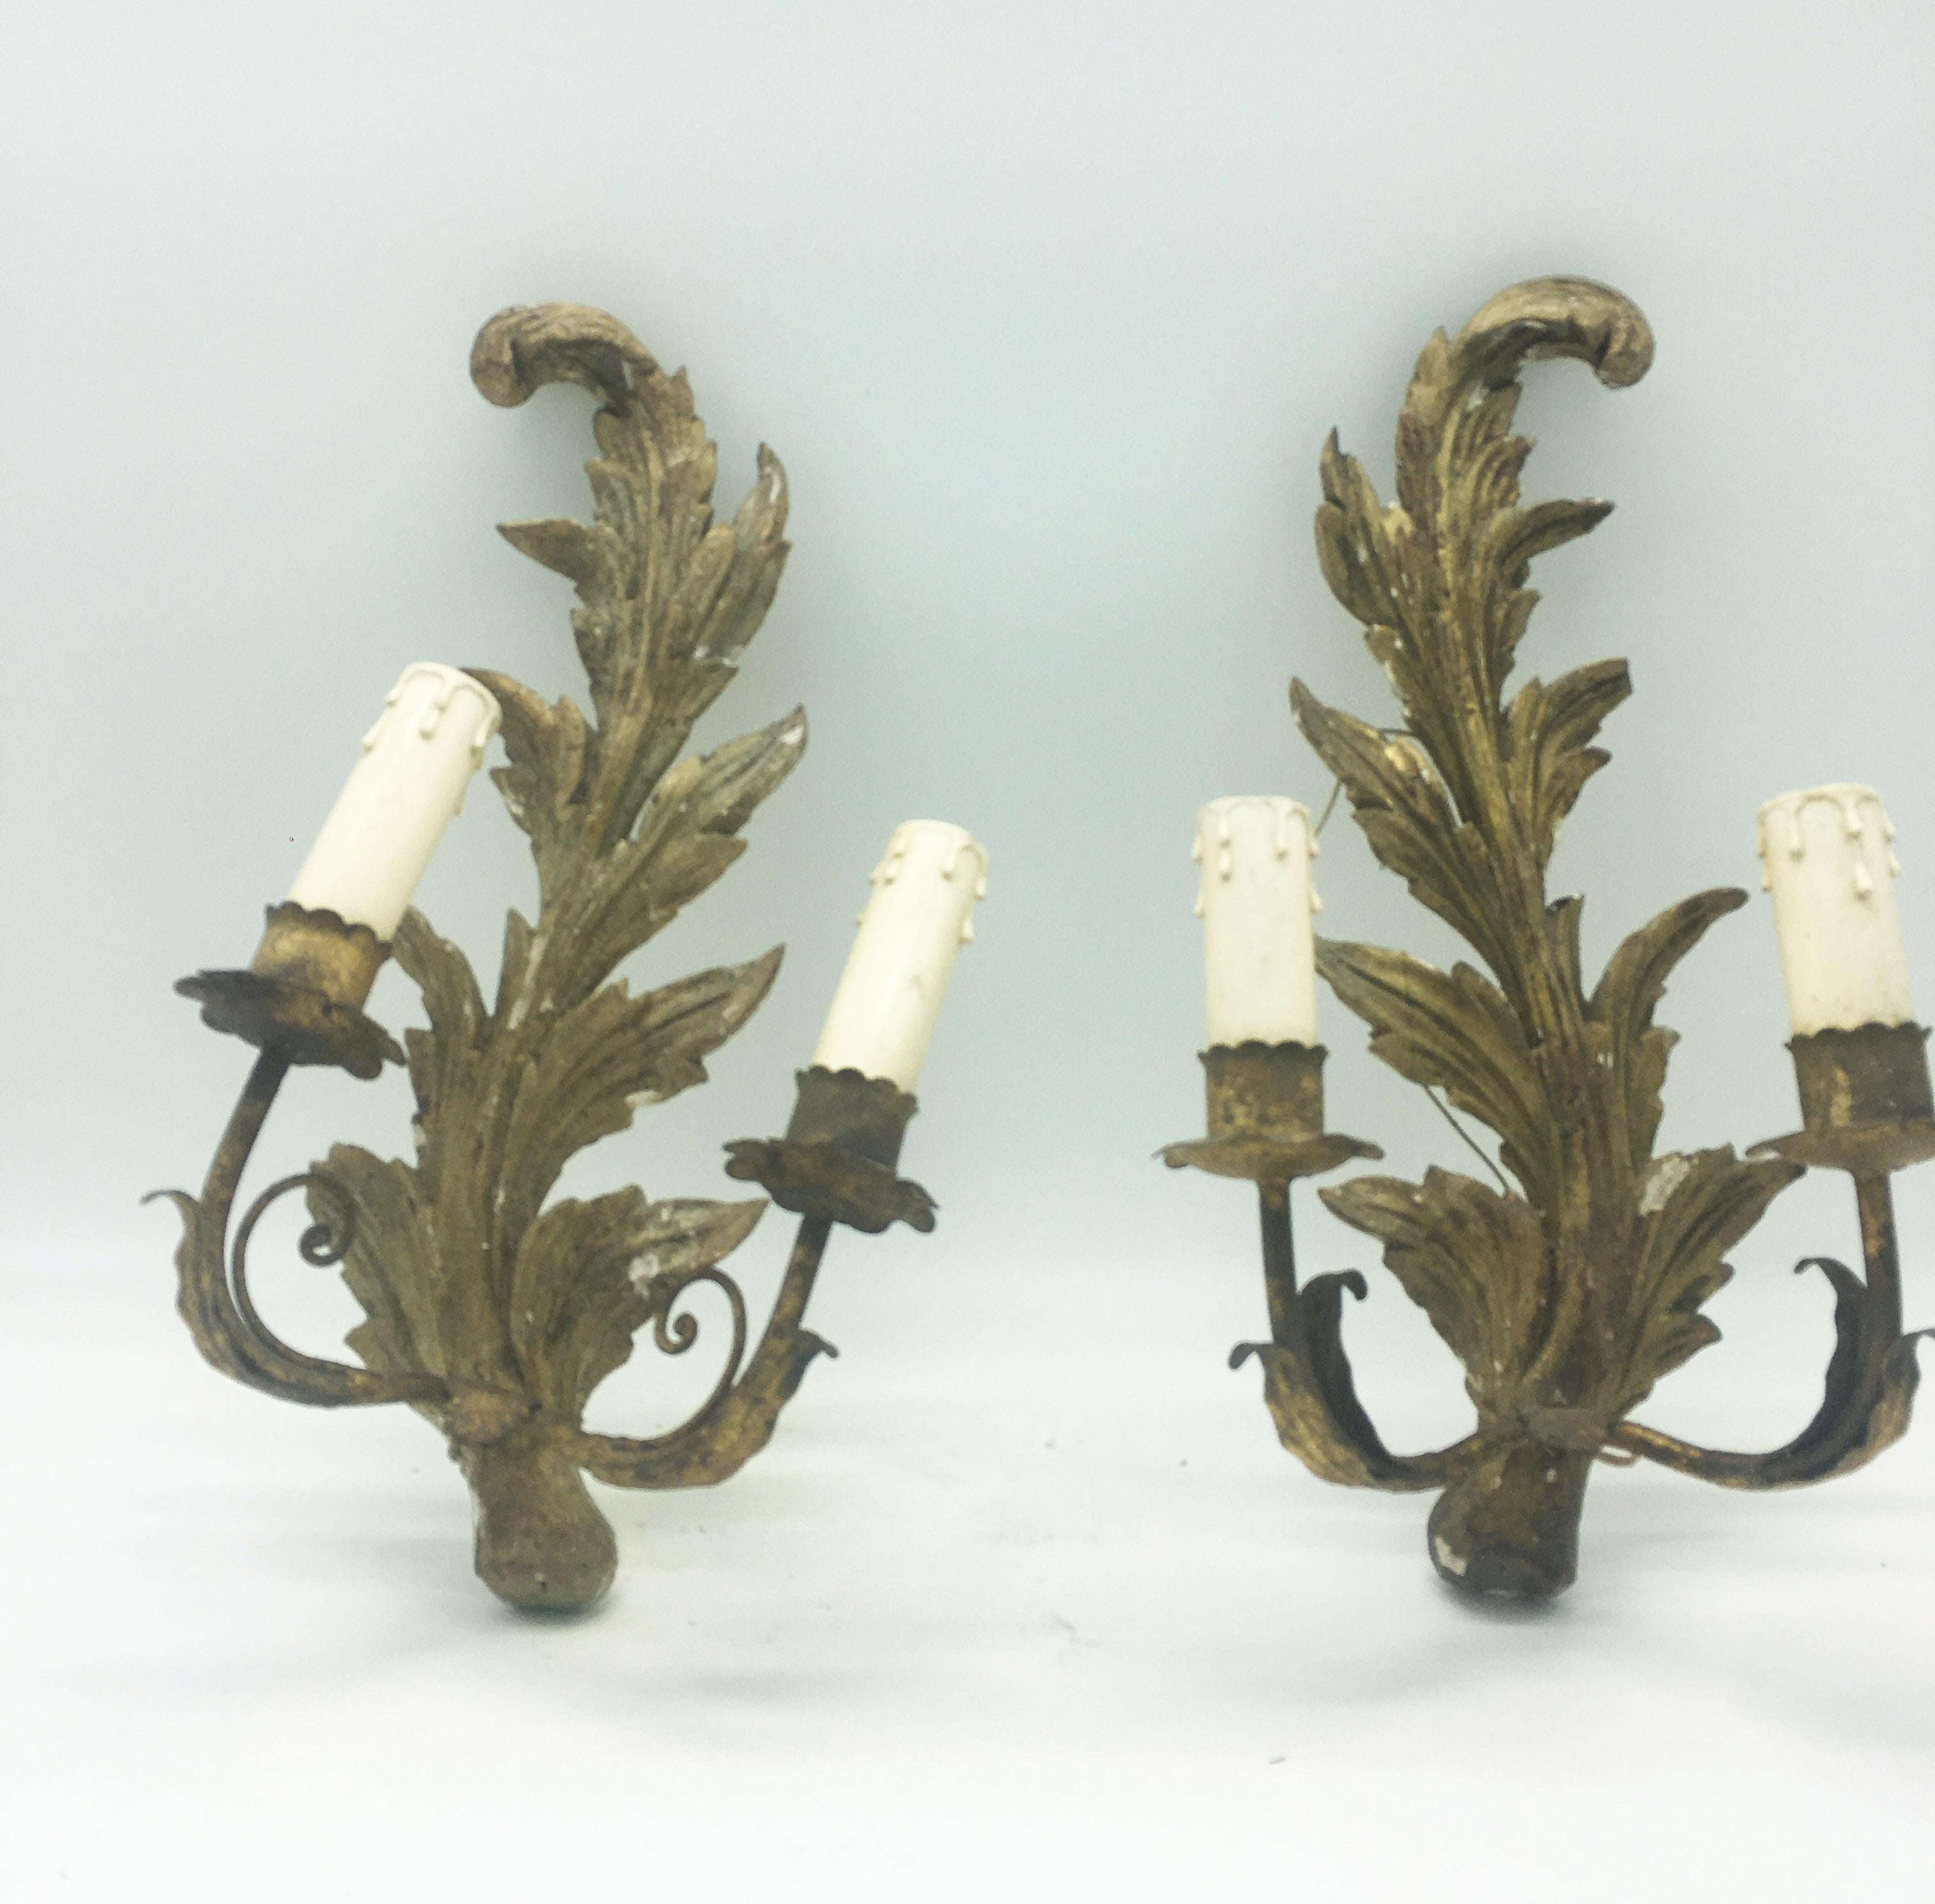 Rare ancient pair of 2-light wall lights in metal and carved gilded wood.
Neapolitan manufacture of the 18th century.
Suitable for candelabra with electric lamp.